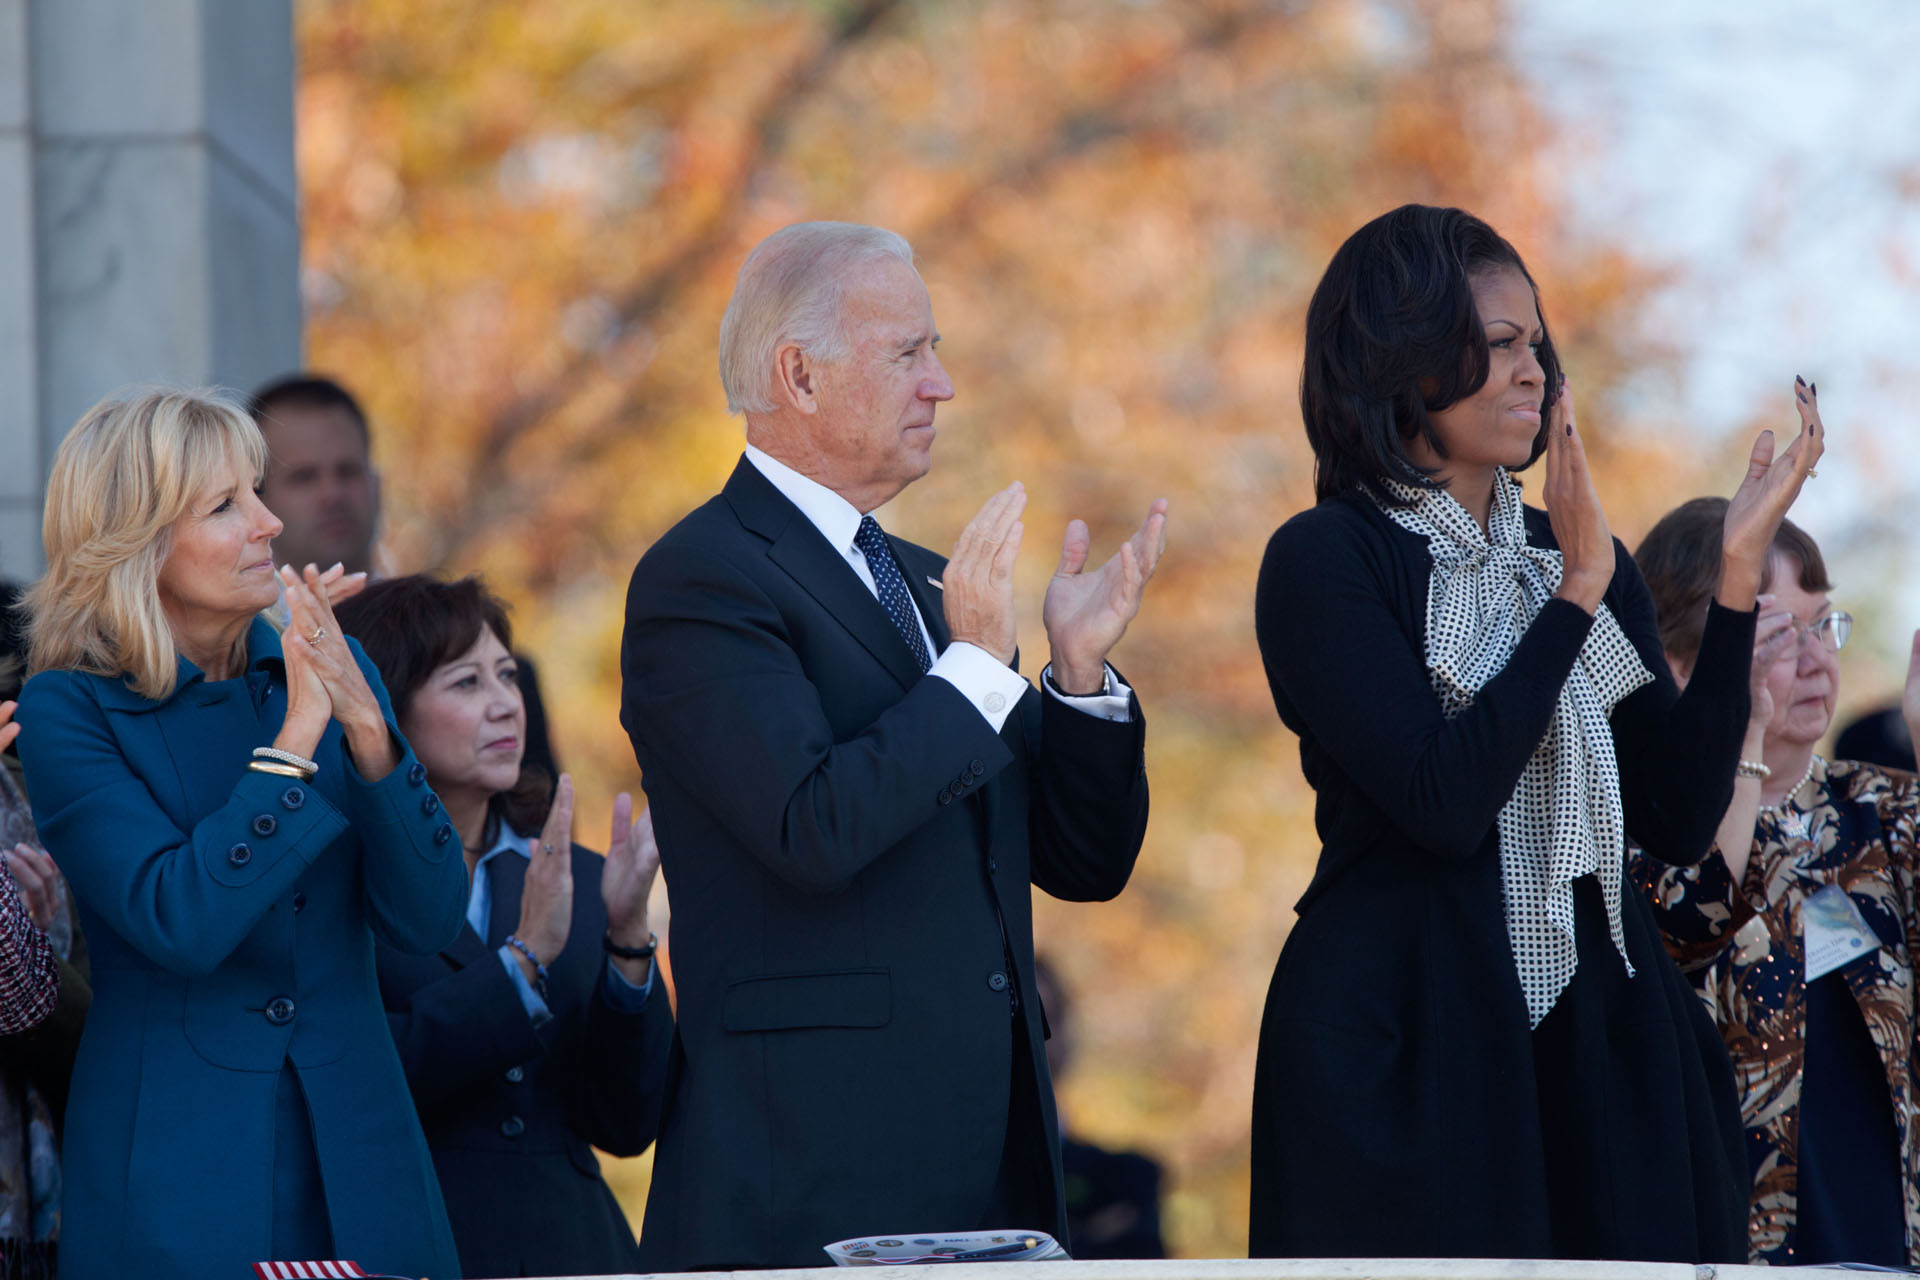 Vice President Biden, Dr. Biden, and the First Lady at Arlington